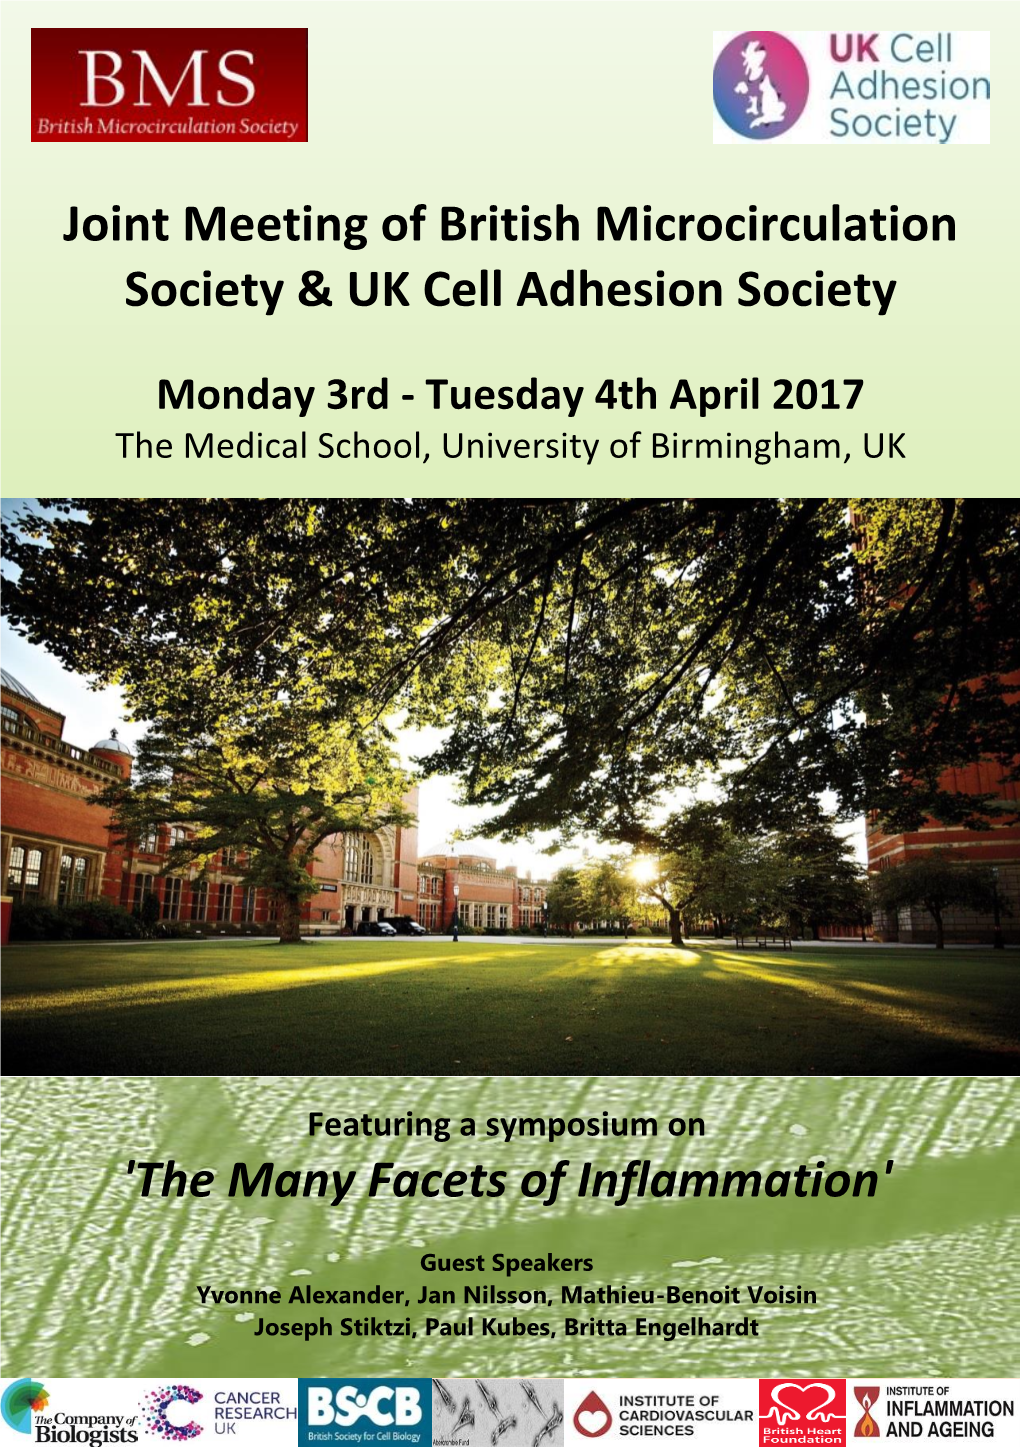 Joint Meeting of British Microcirculation Society & UK Cell